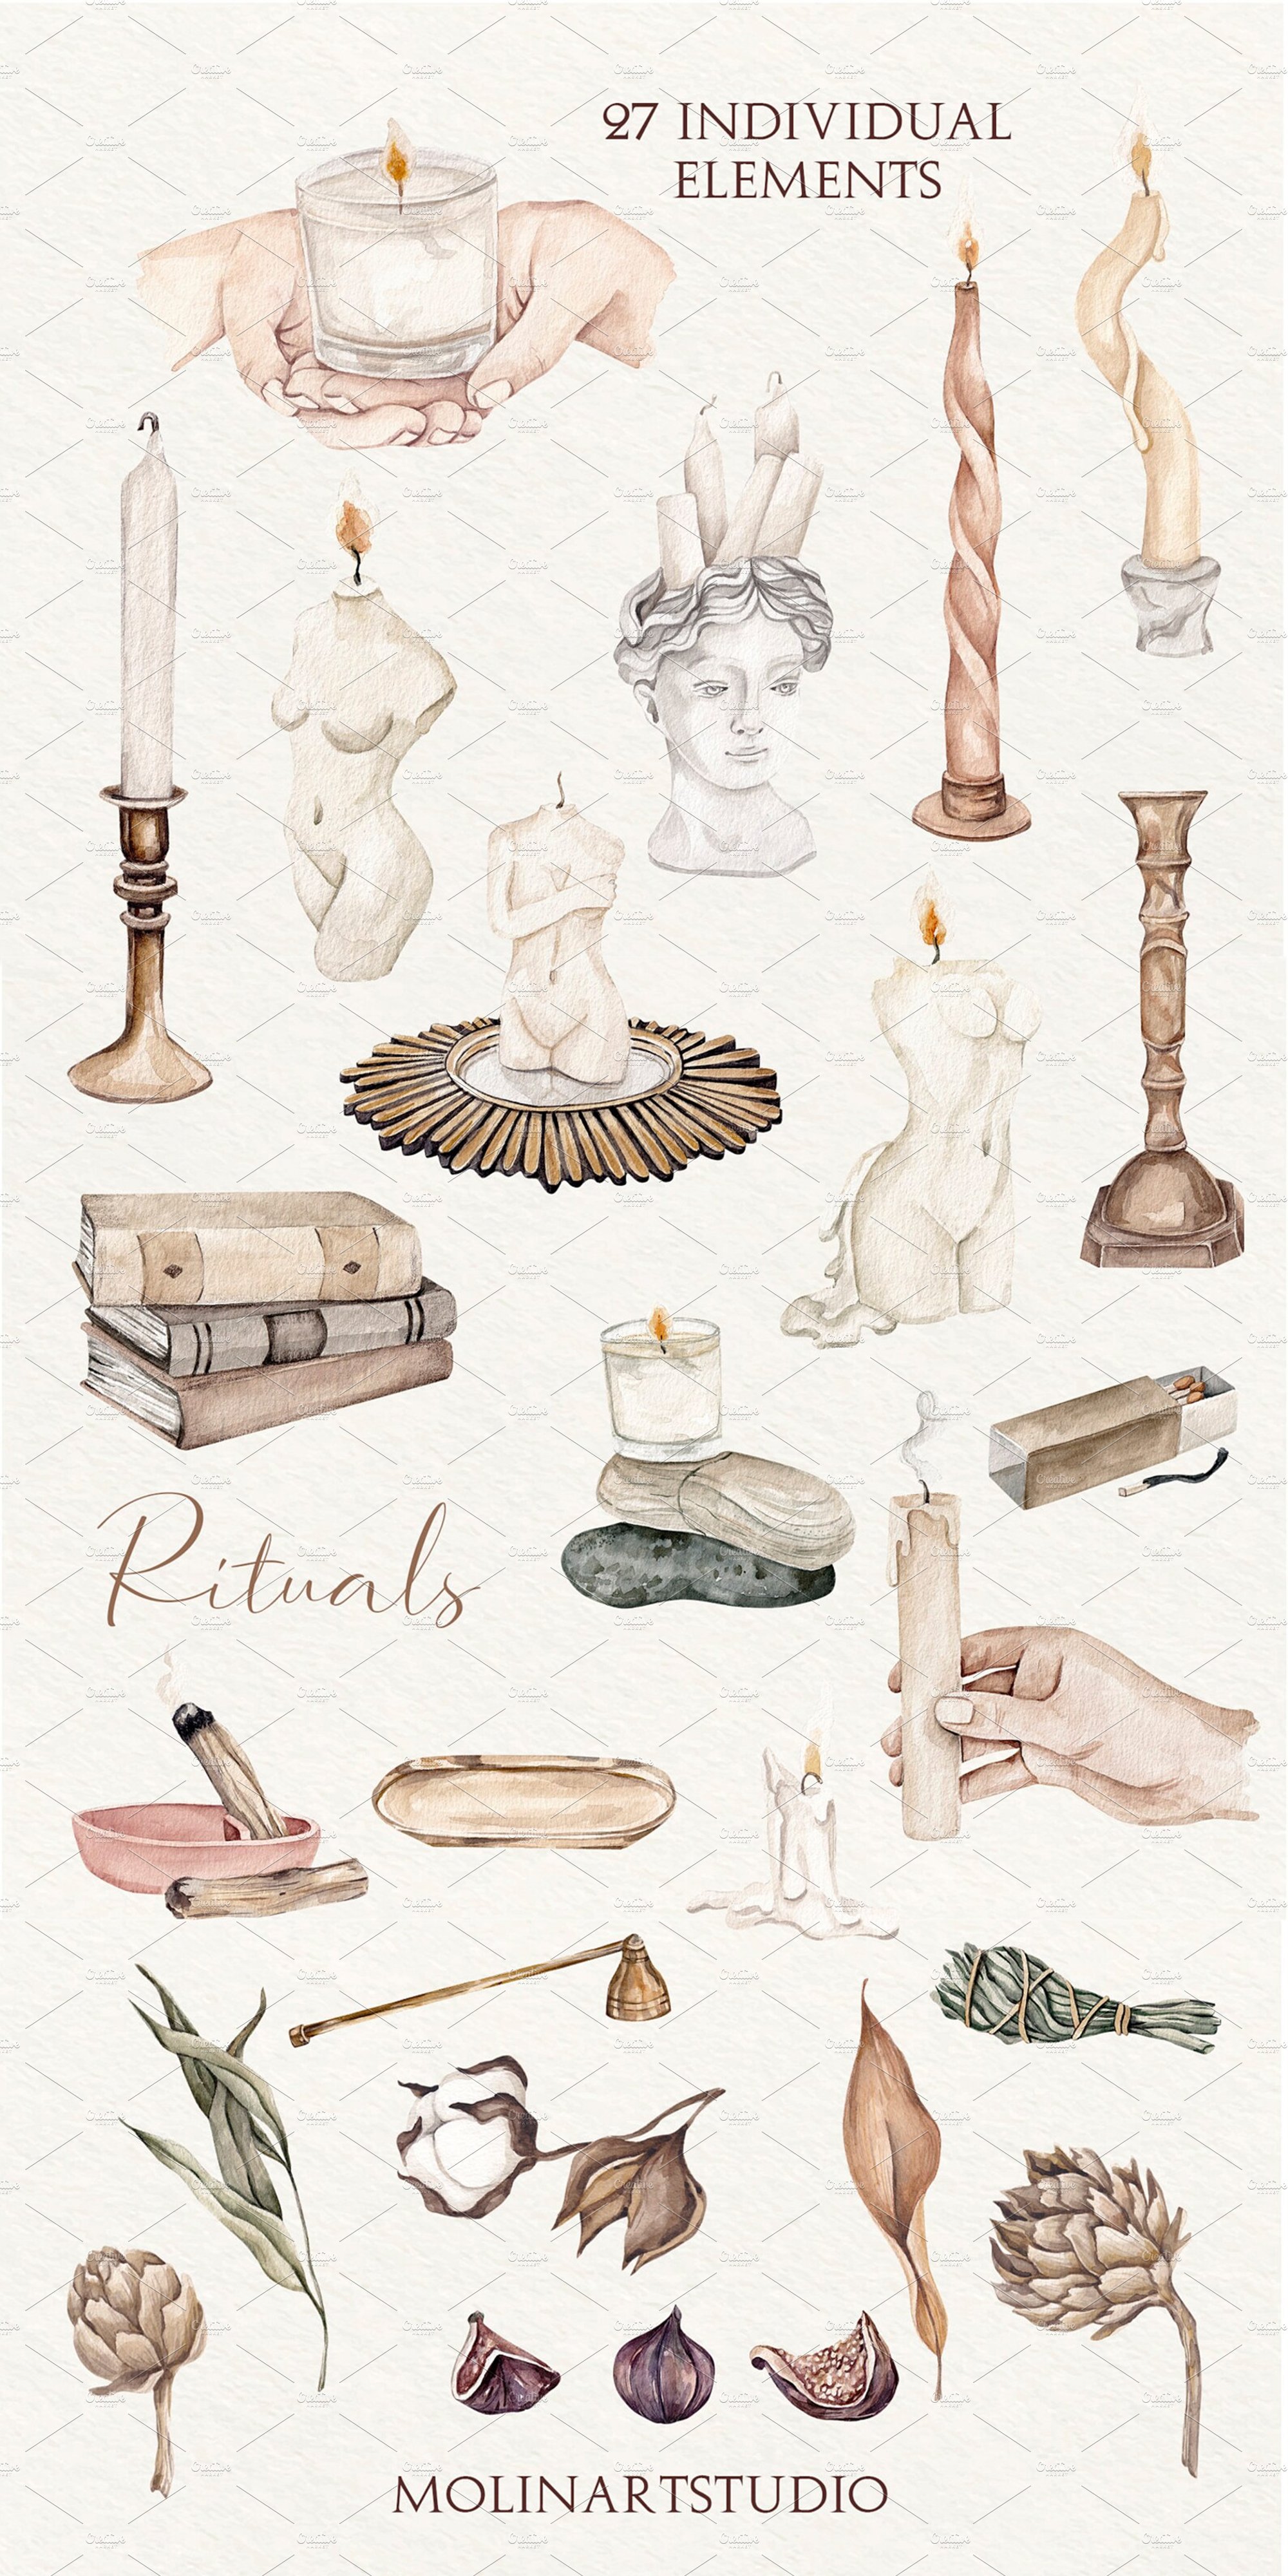 Watercolor Candles Clipart preview image.